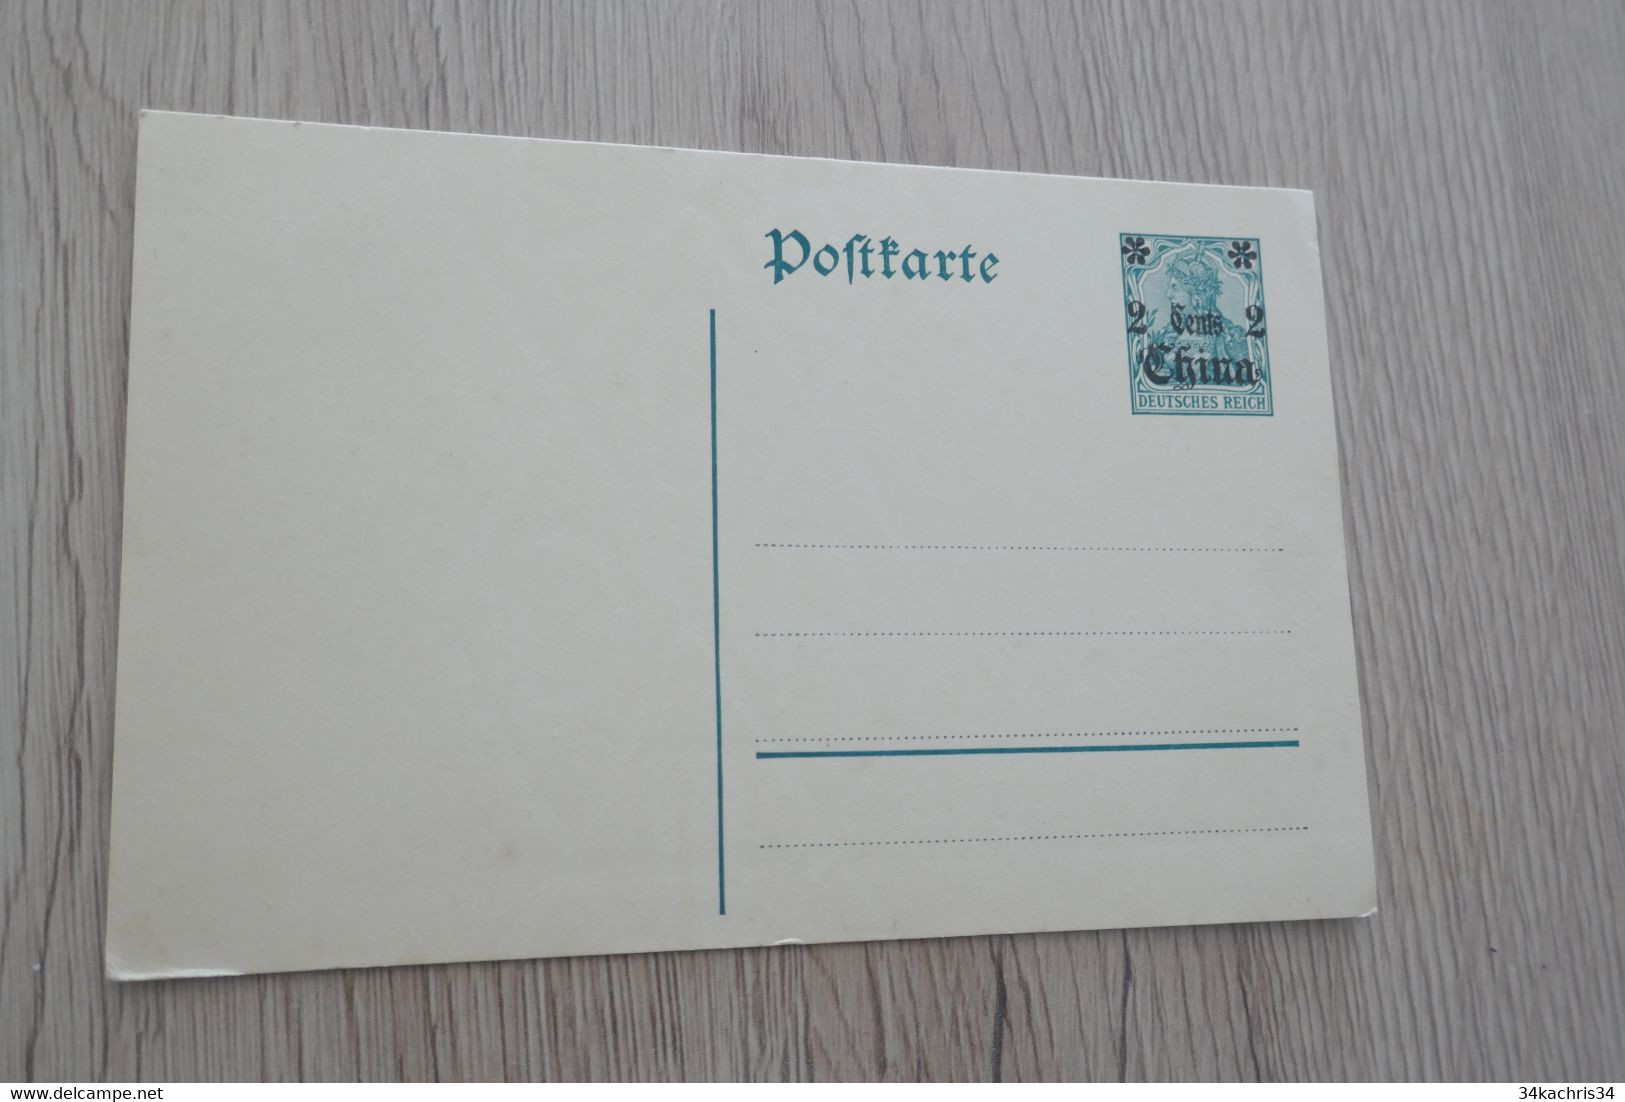 CHINE ENTIER POSTAL ALLEMAGNE SURCHARGE 2 CENTS CHINA - China (kantoren)